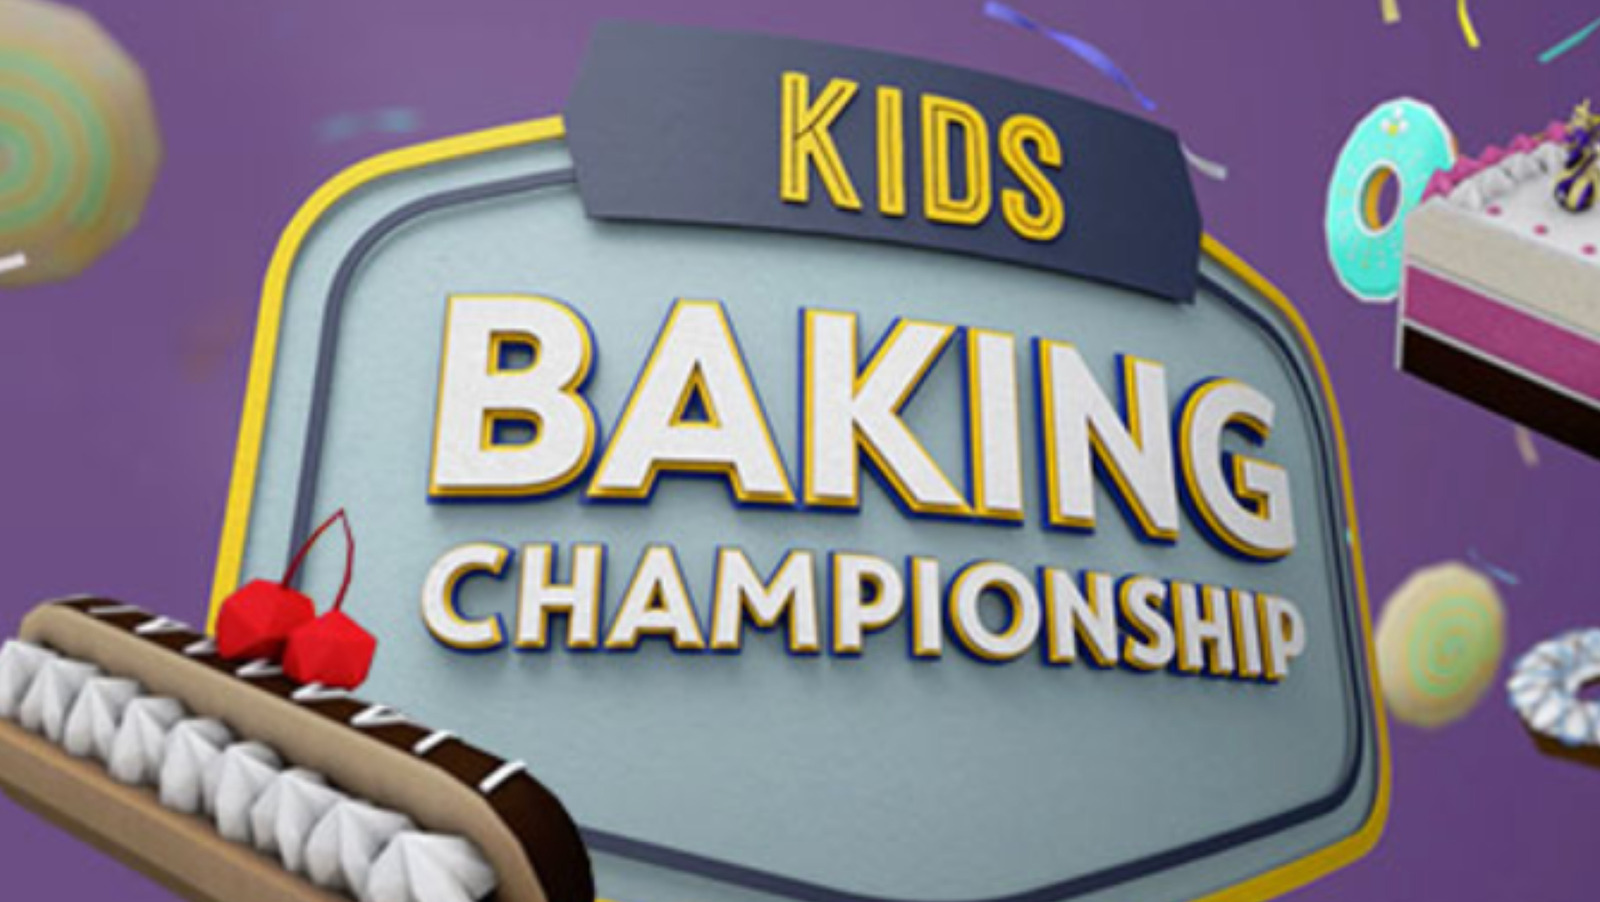 Here's How To Get Cast On Kids Baking Championship